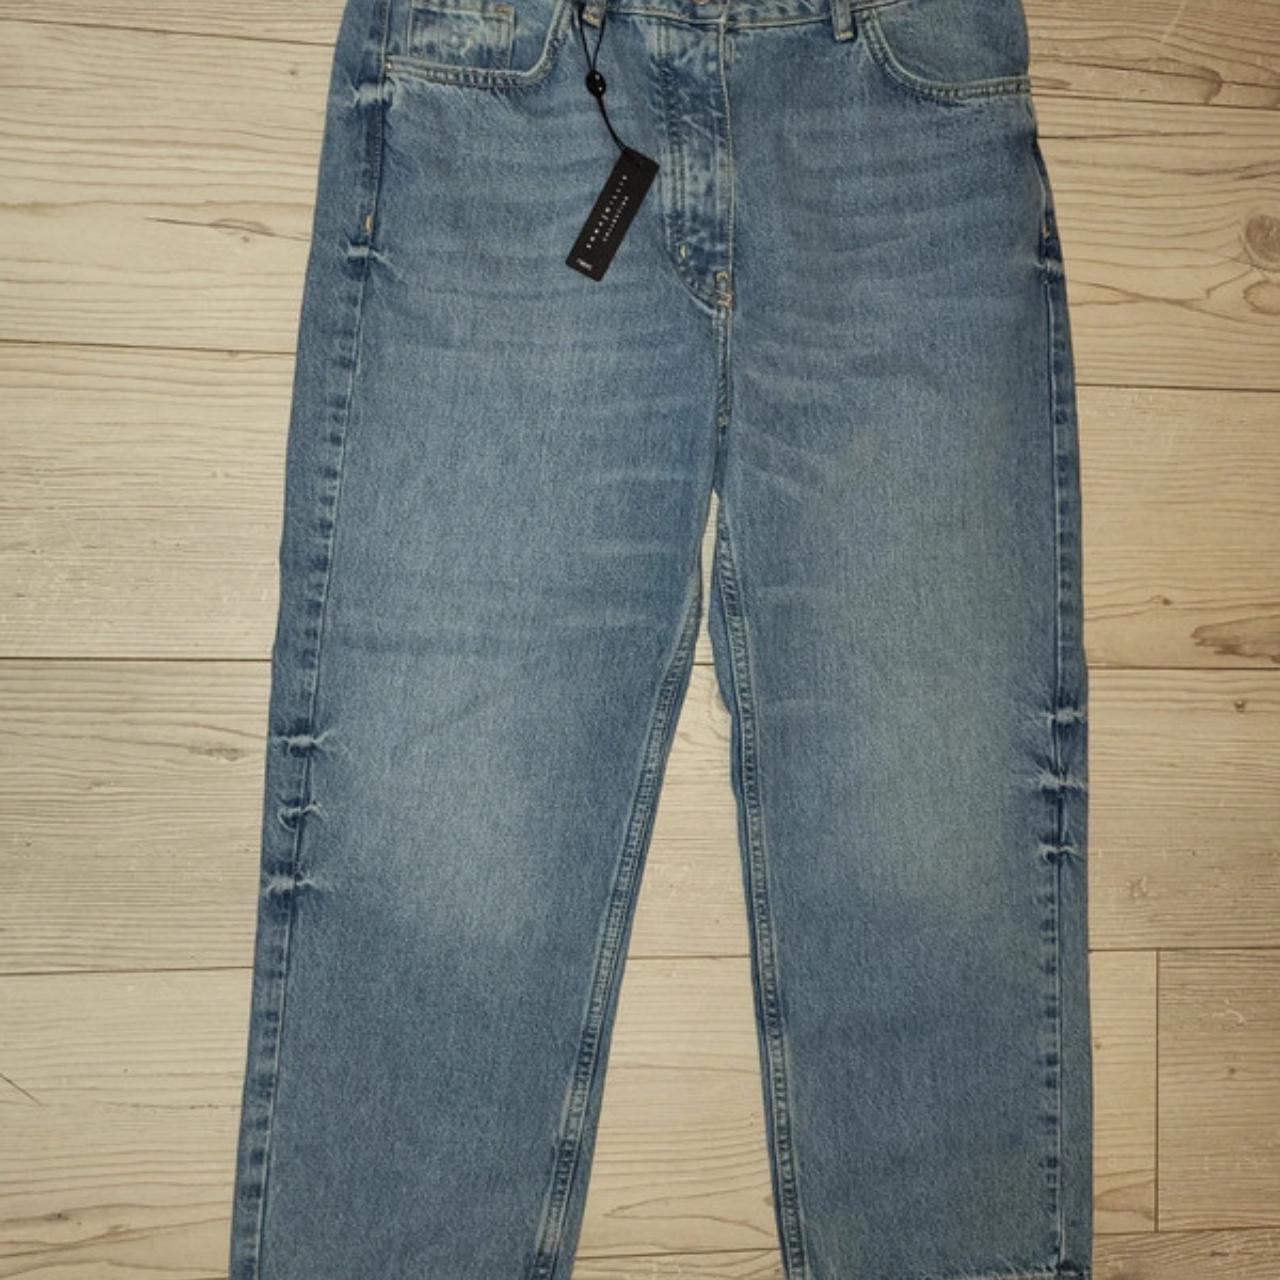 Emma Willis Collection Next Ladies Jeans 10R From... - Depop